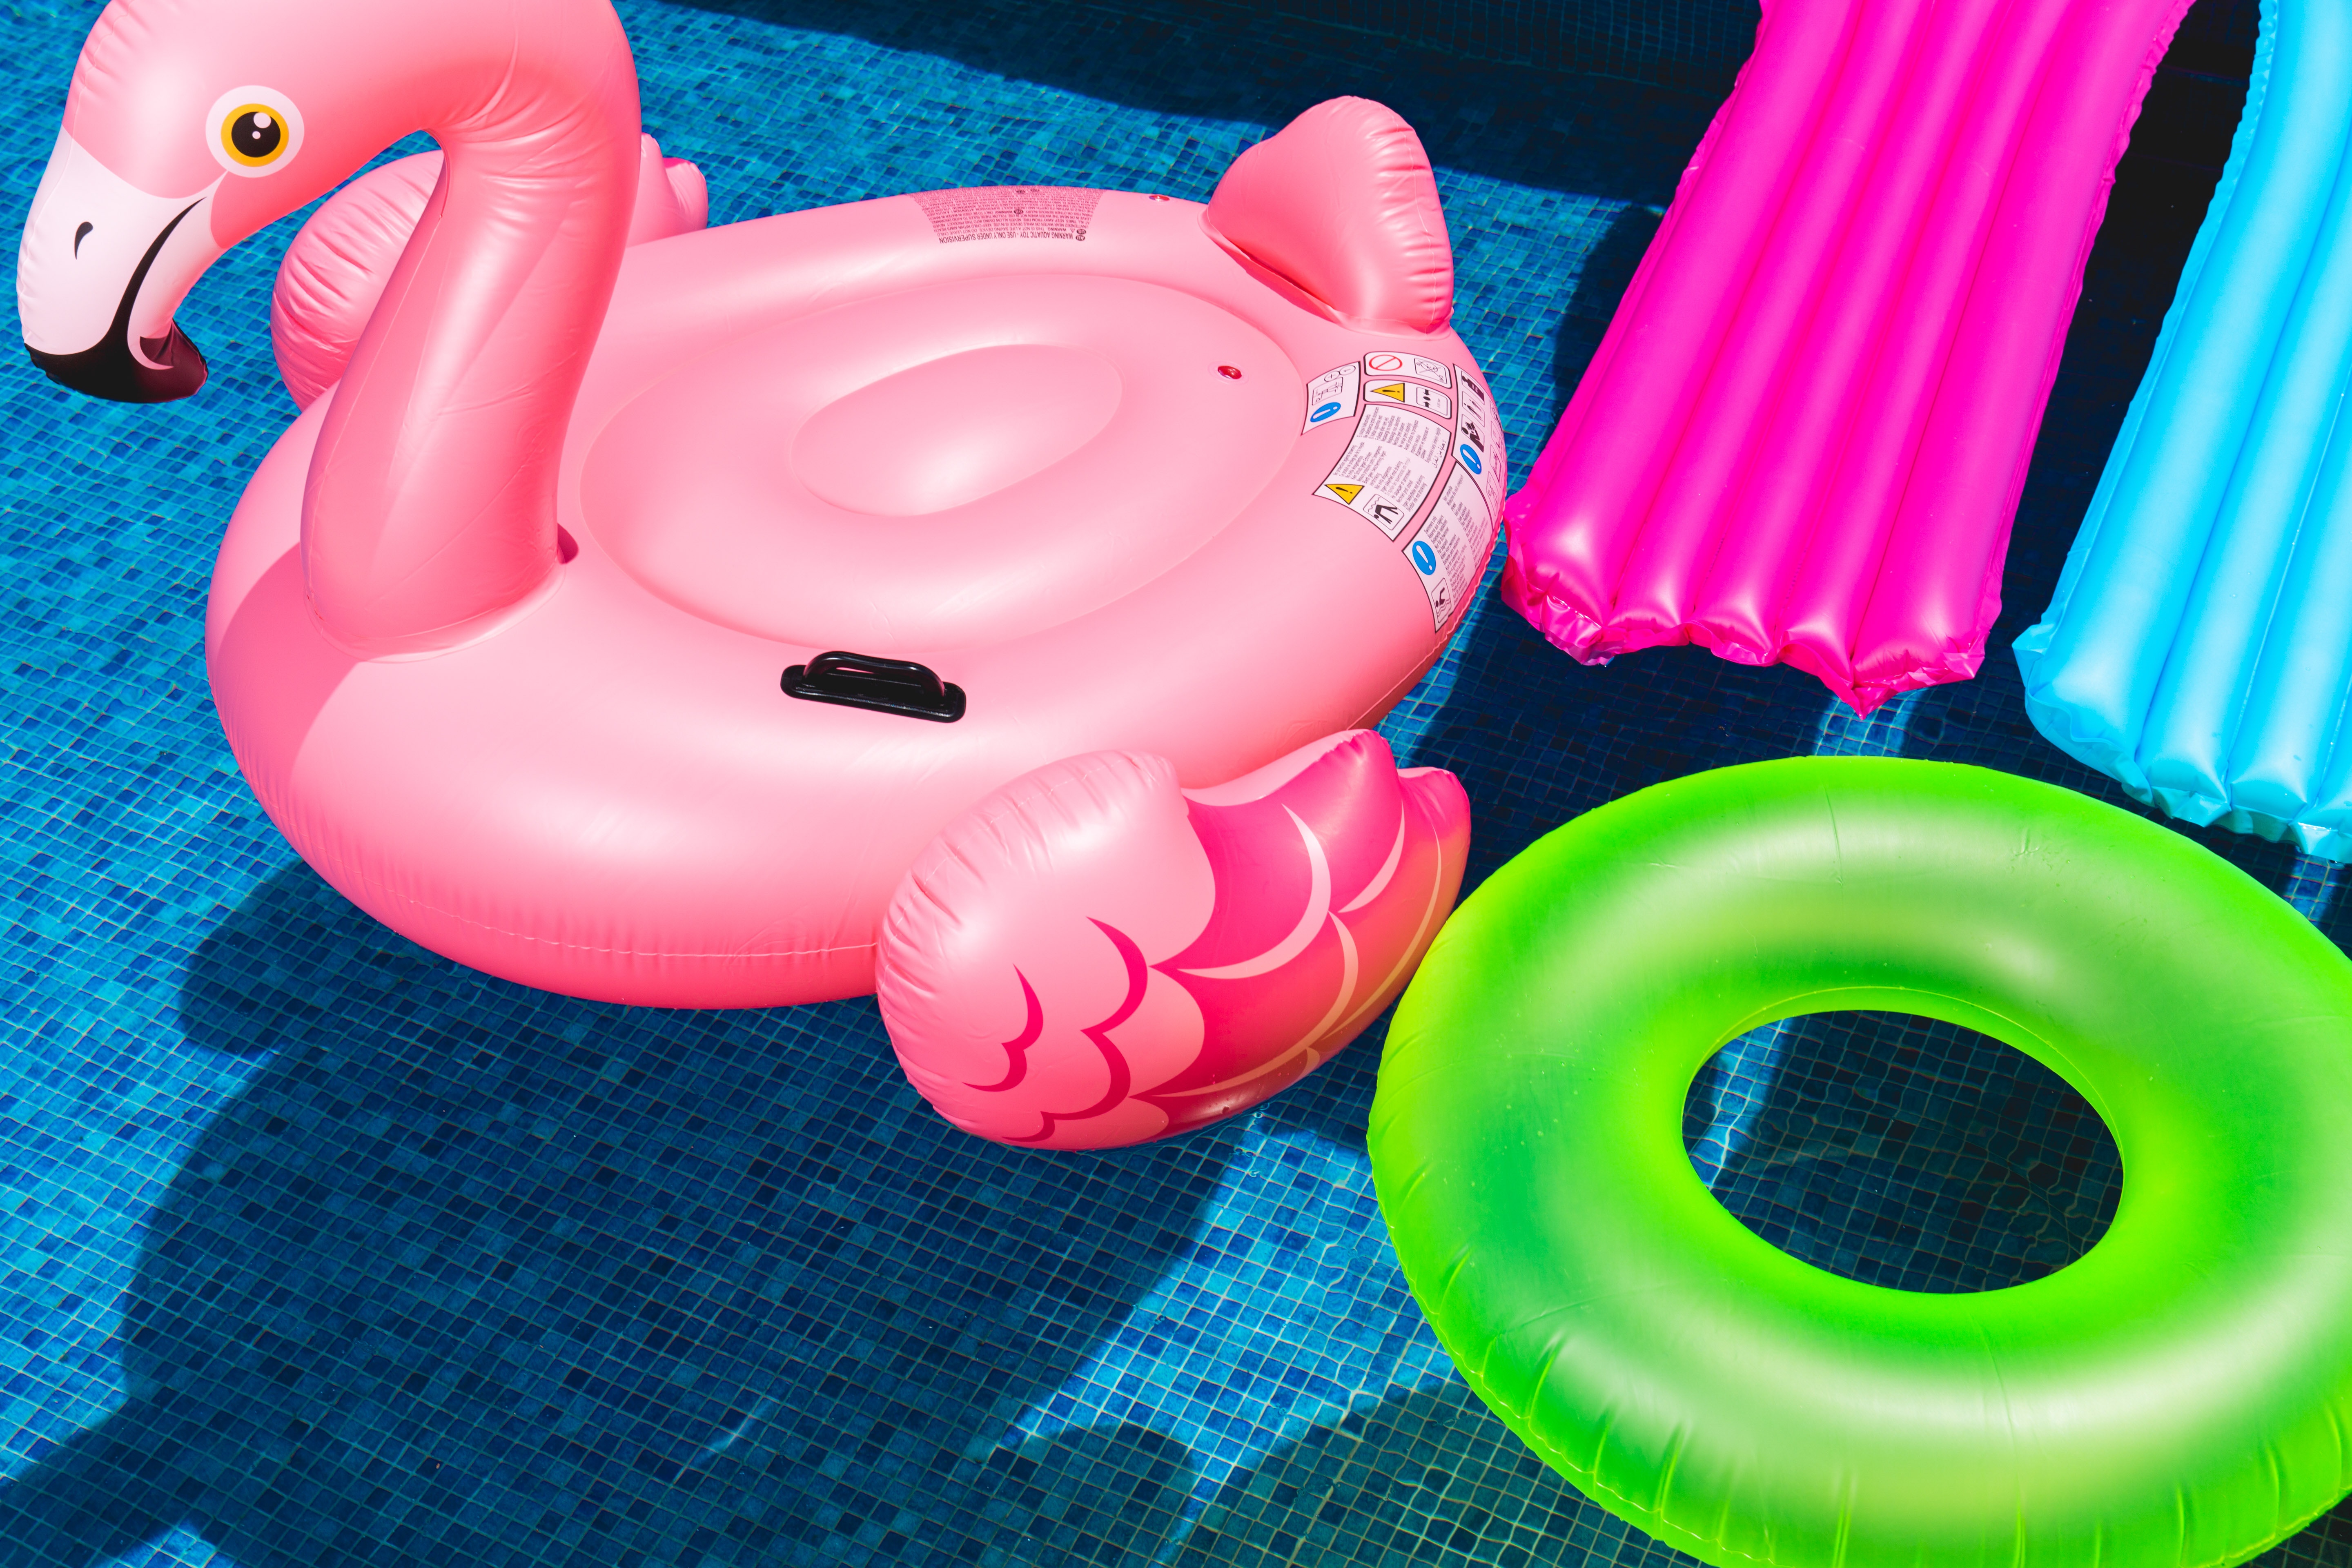 Outdoor water toys. Variety of pool float toys. Pink Flamingo and two beds one blue one pink.